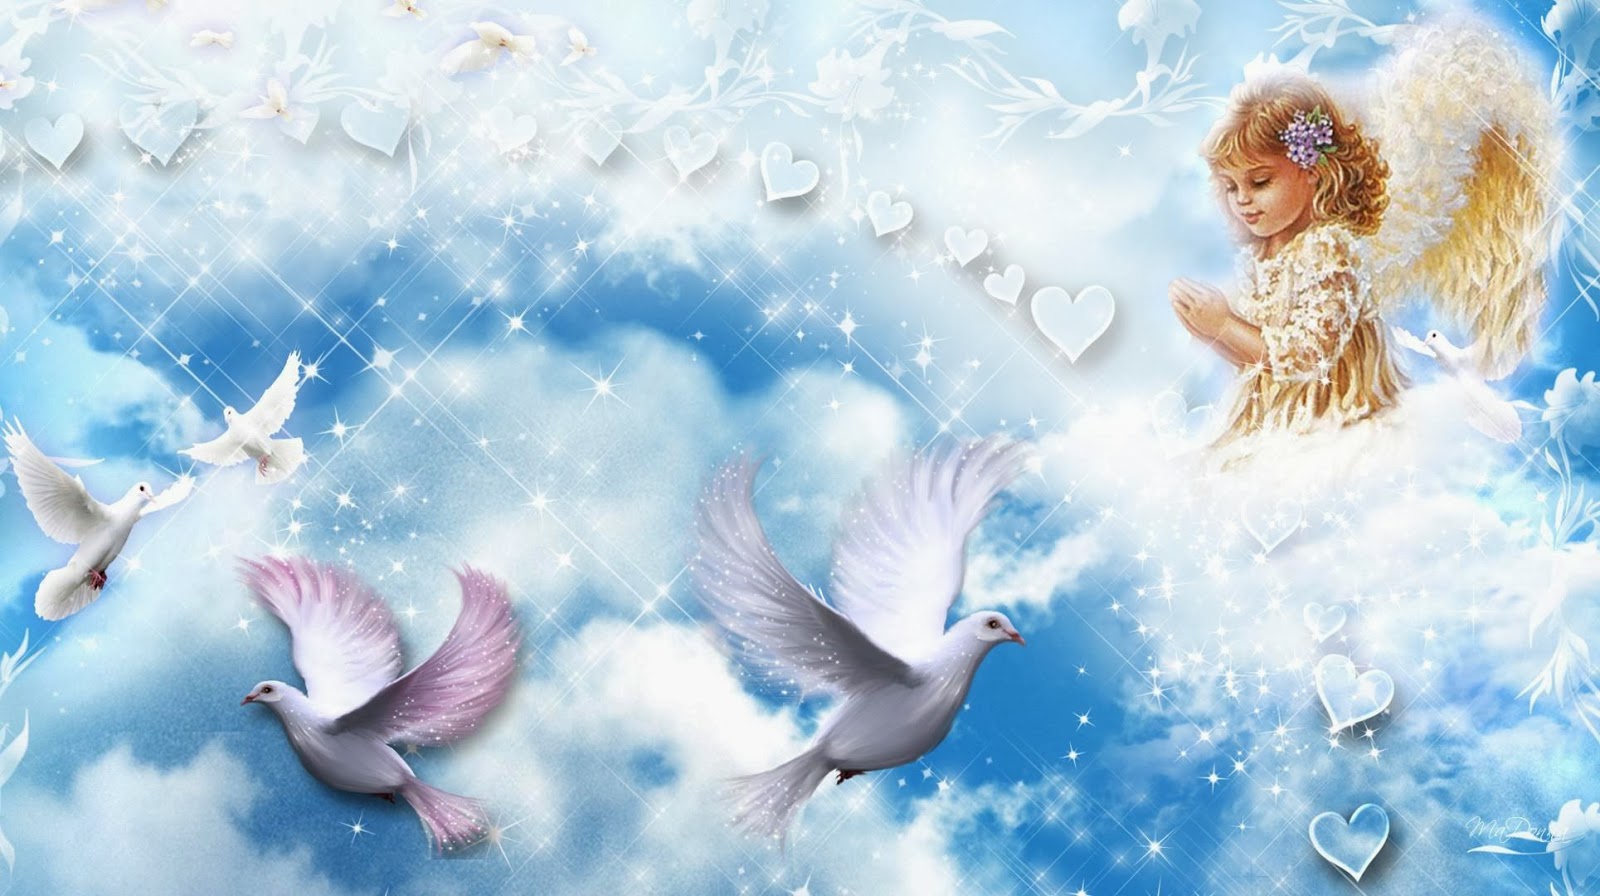 Angels and doves wallpaper   High Definition Wallpapers for Desktop 1600x896